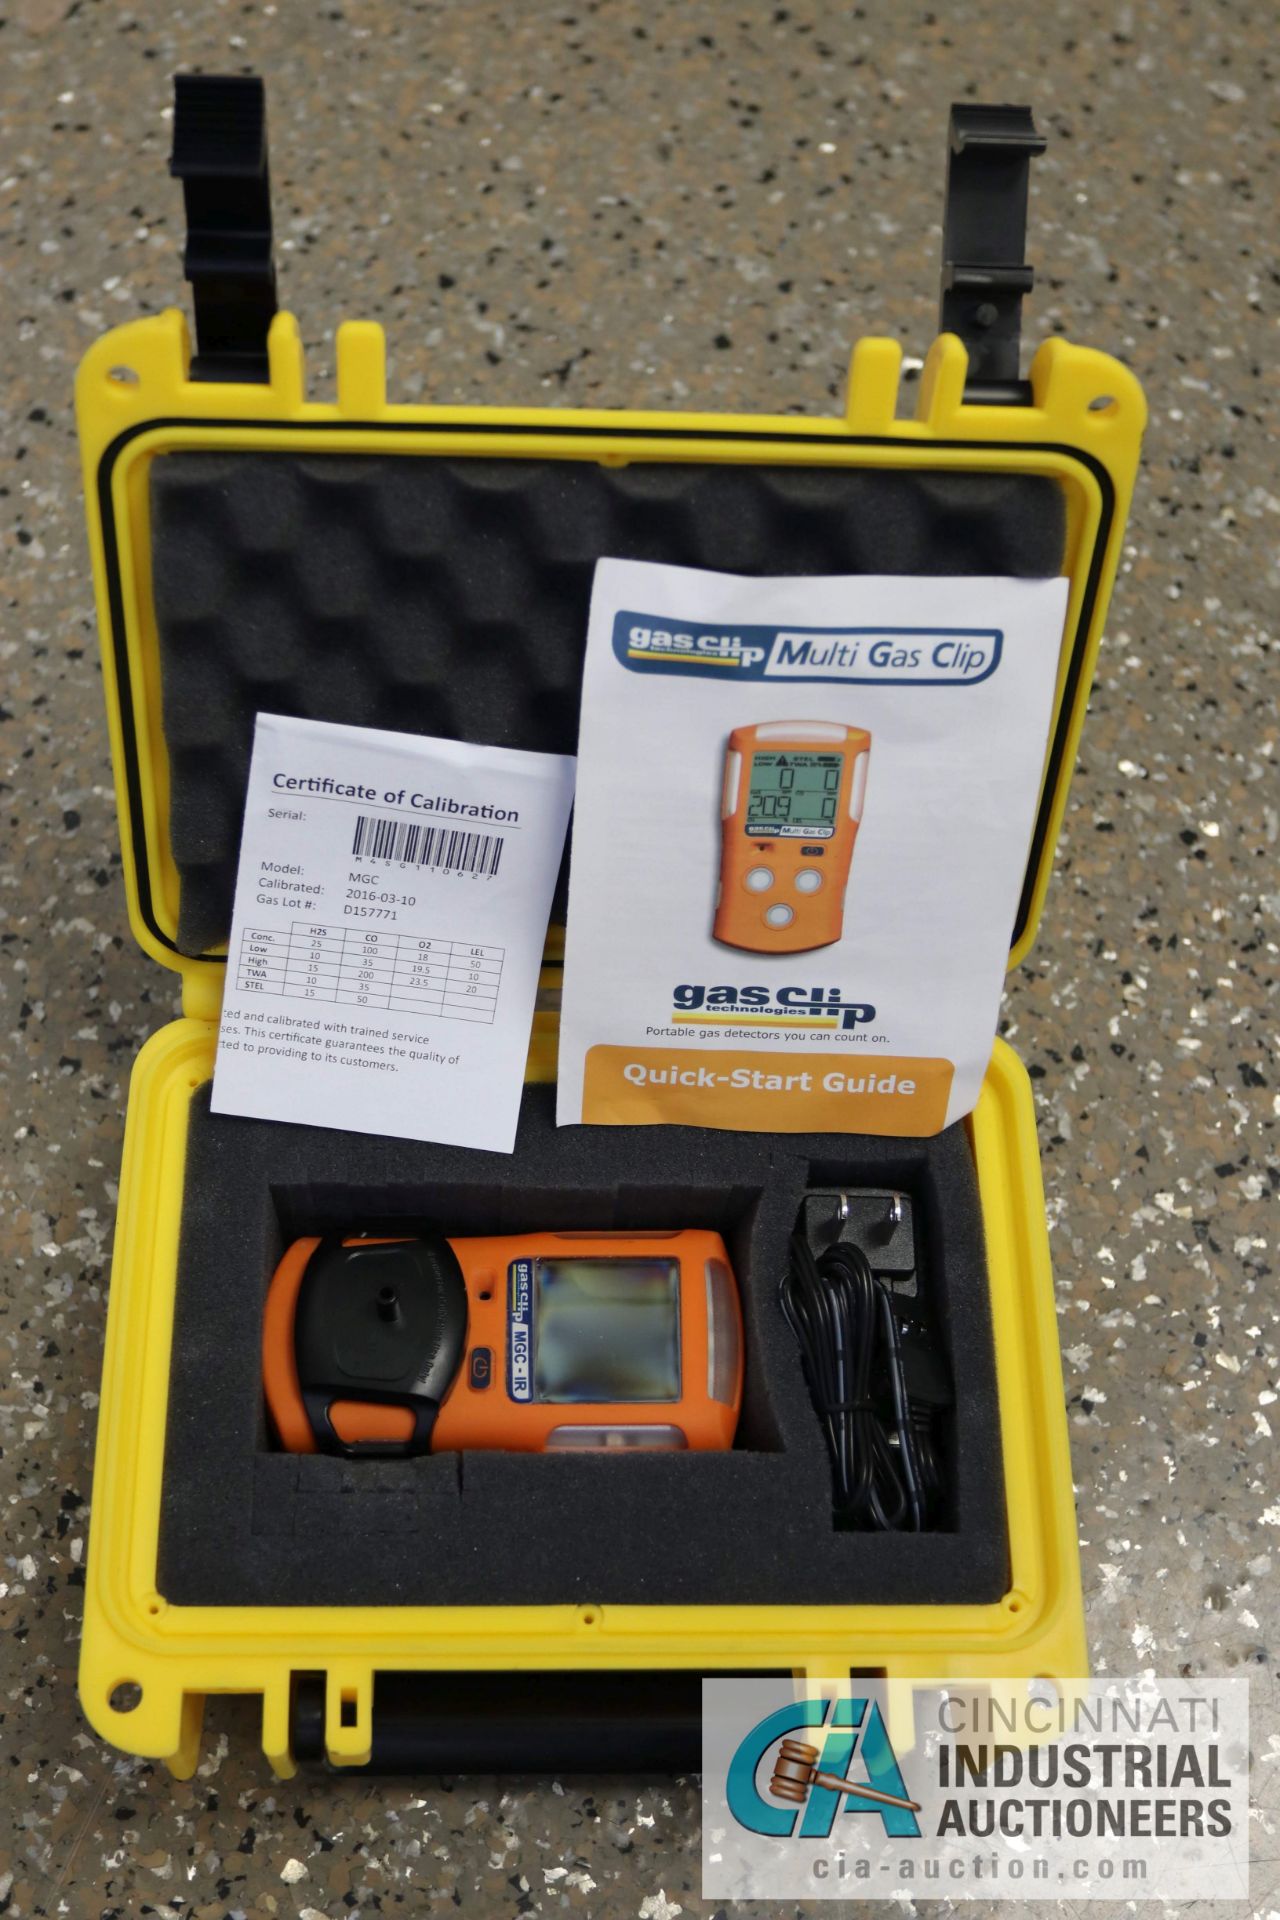 GAS CLIP MULTI GAS PORTABLE GAS DETECTOR METER; MODEL MGC, LOT #D157771 (2016) - Located in Holland,